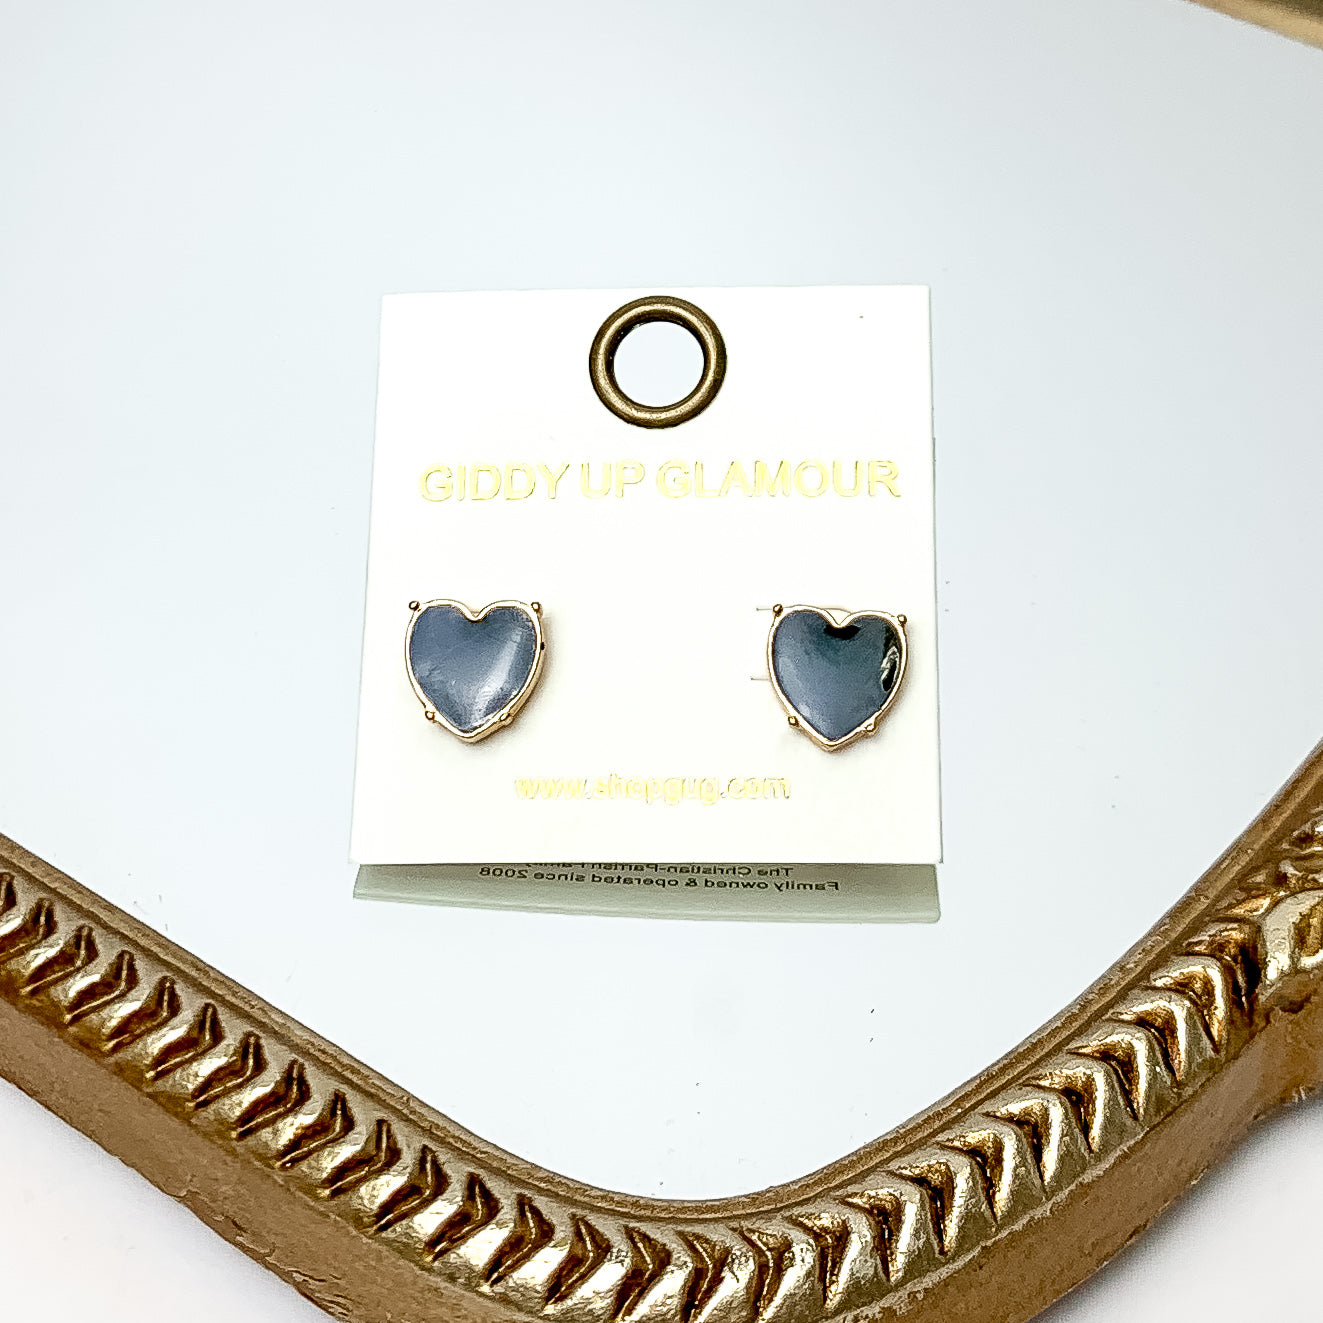 Gold Tone Heart Stud Earrings in Black. These earrings are pictured on a white background with a gold frame around.